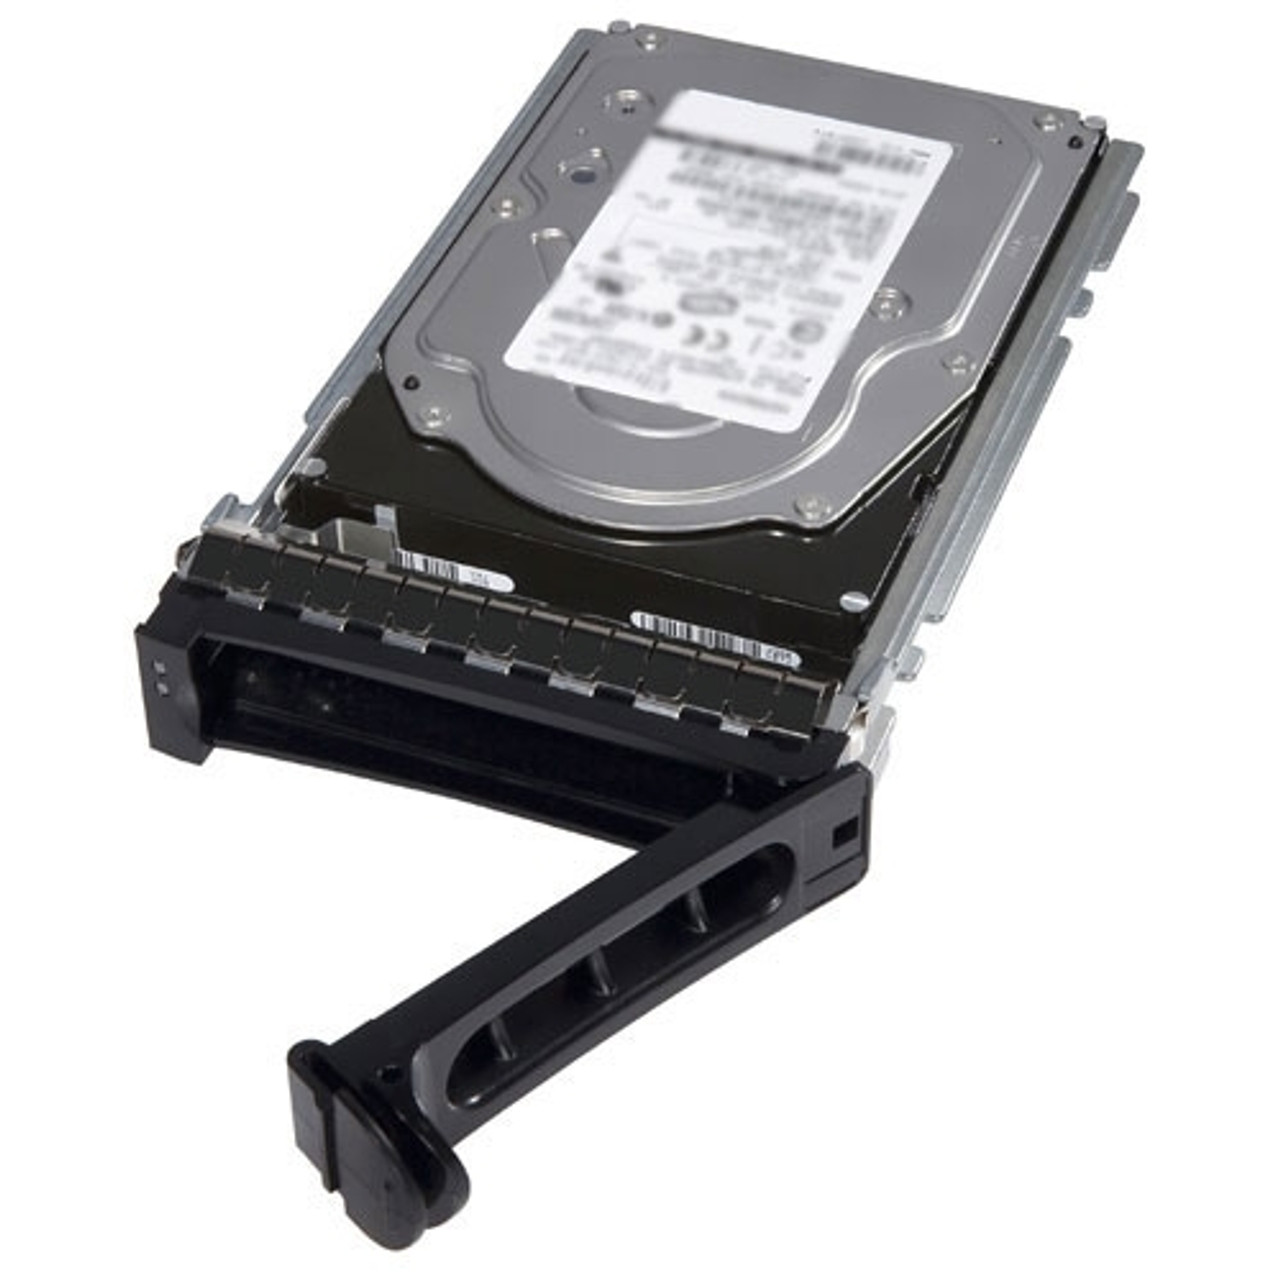 DELL WR767 73gb 15000rpm Sas-3gbps Hard Disk Drive With Tray 8mb Buffer 3.5 Inch Low Profile(1.0 Inch)